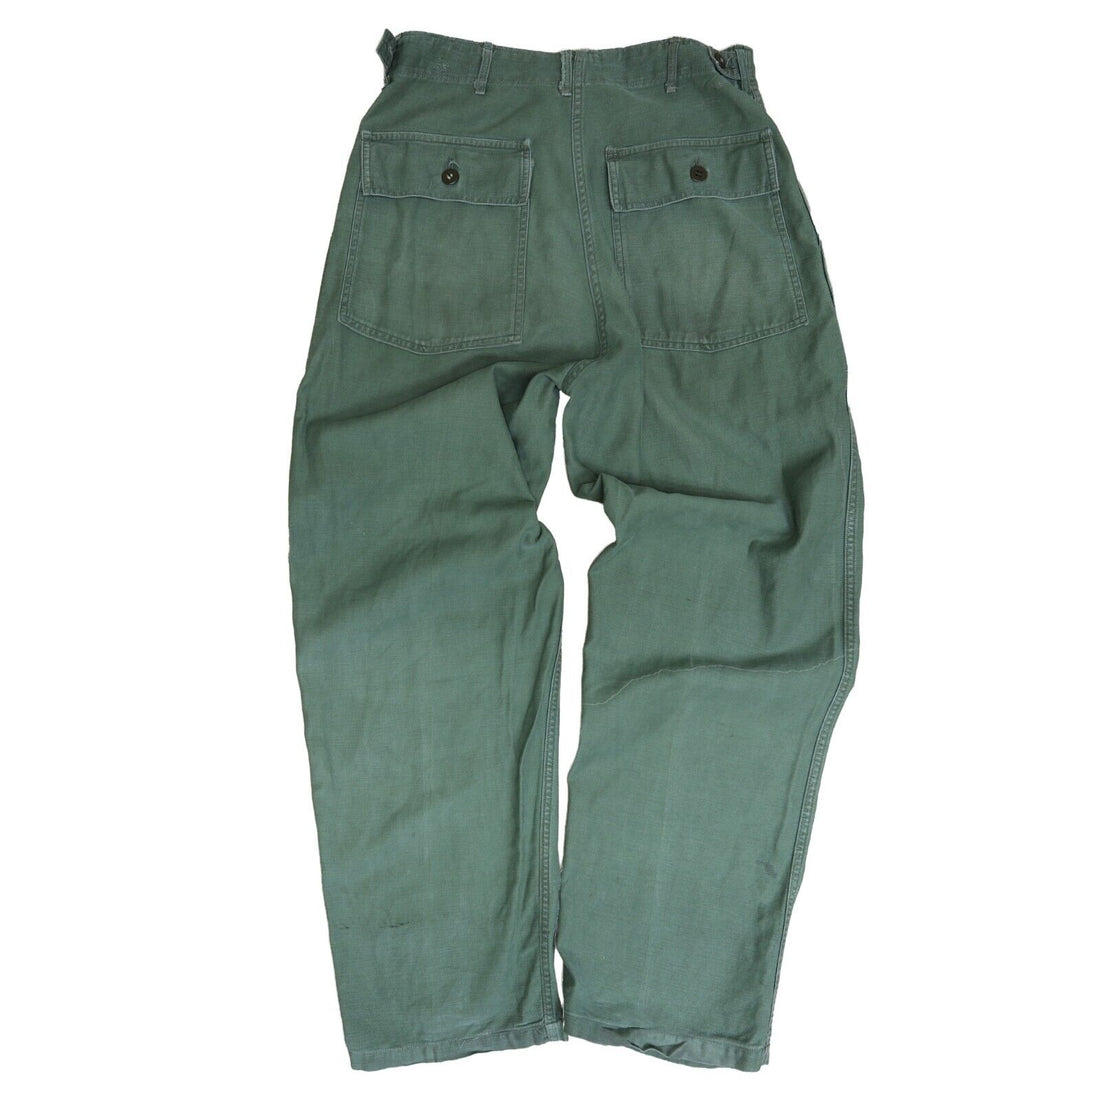 Vintage OG-107 Fatigue Sateen Pants Size 30 X 30 Army Green